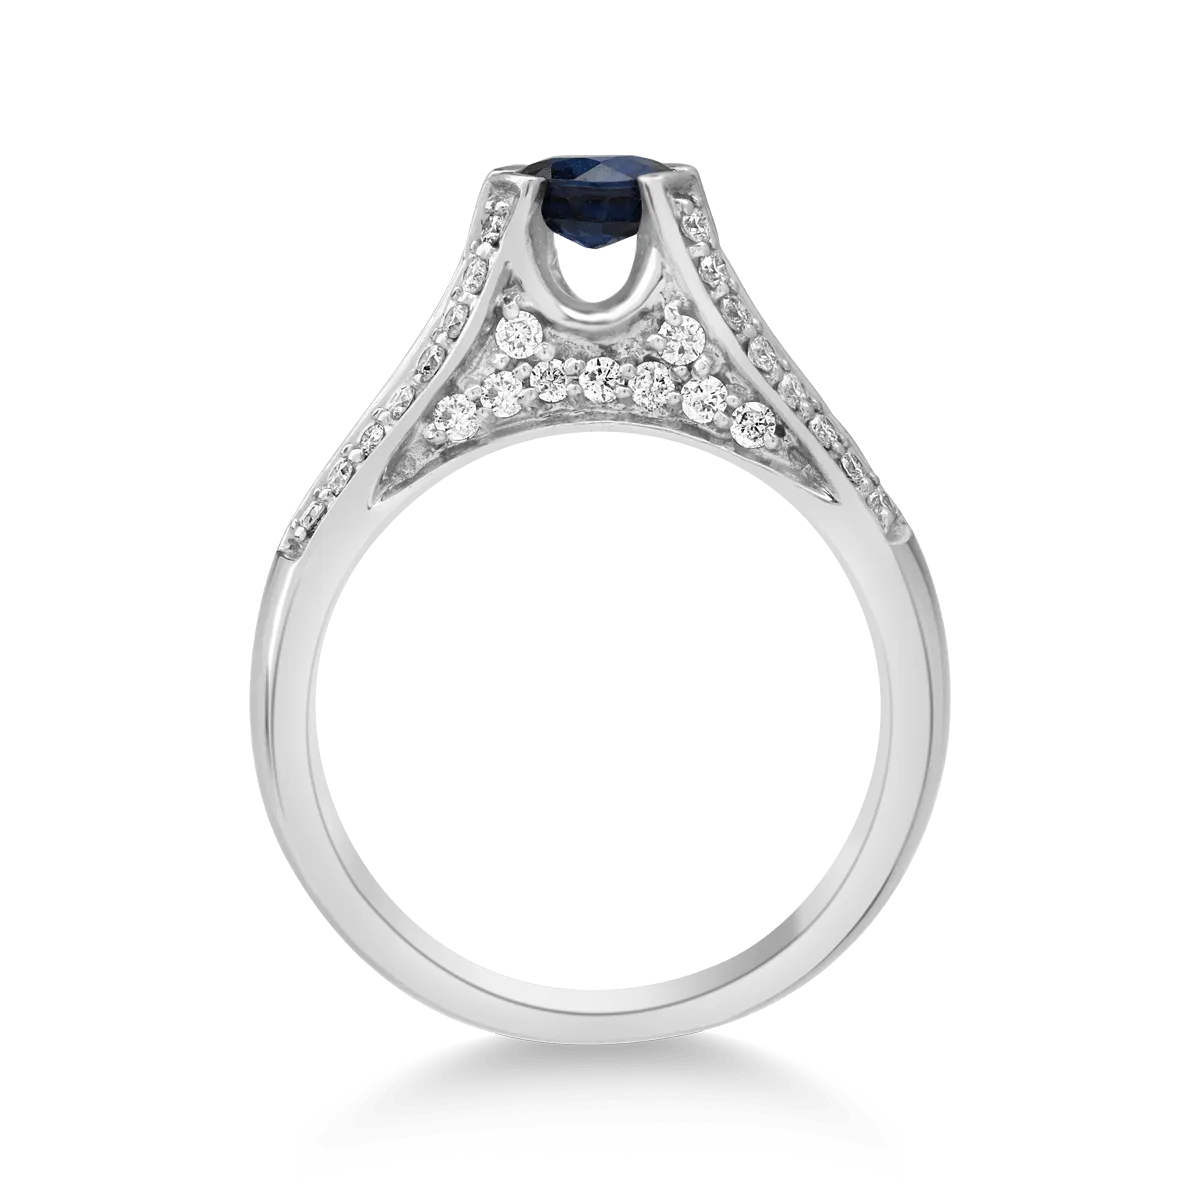 14K white gold ring with 0.8ct treated sapphire and 0.51ct diamonds